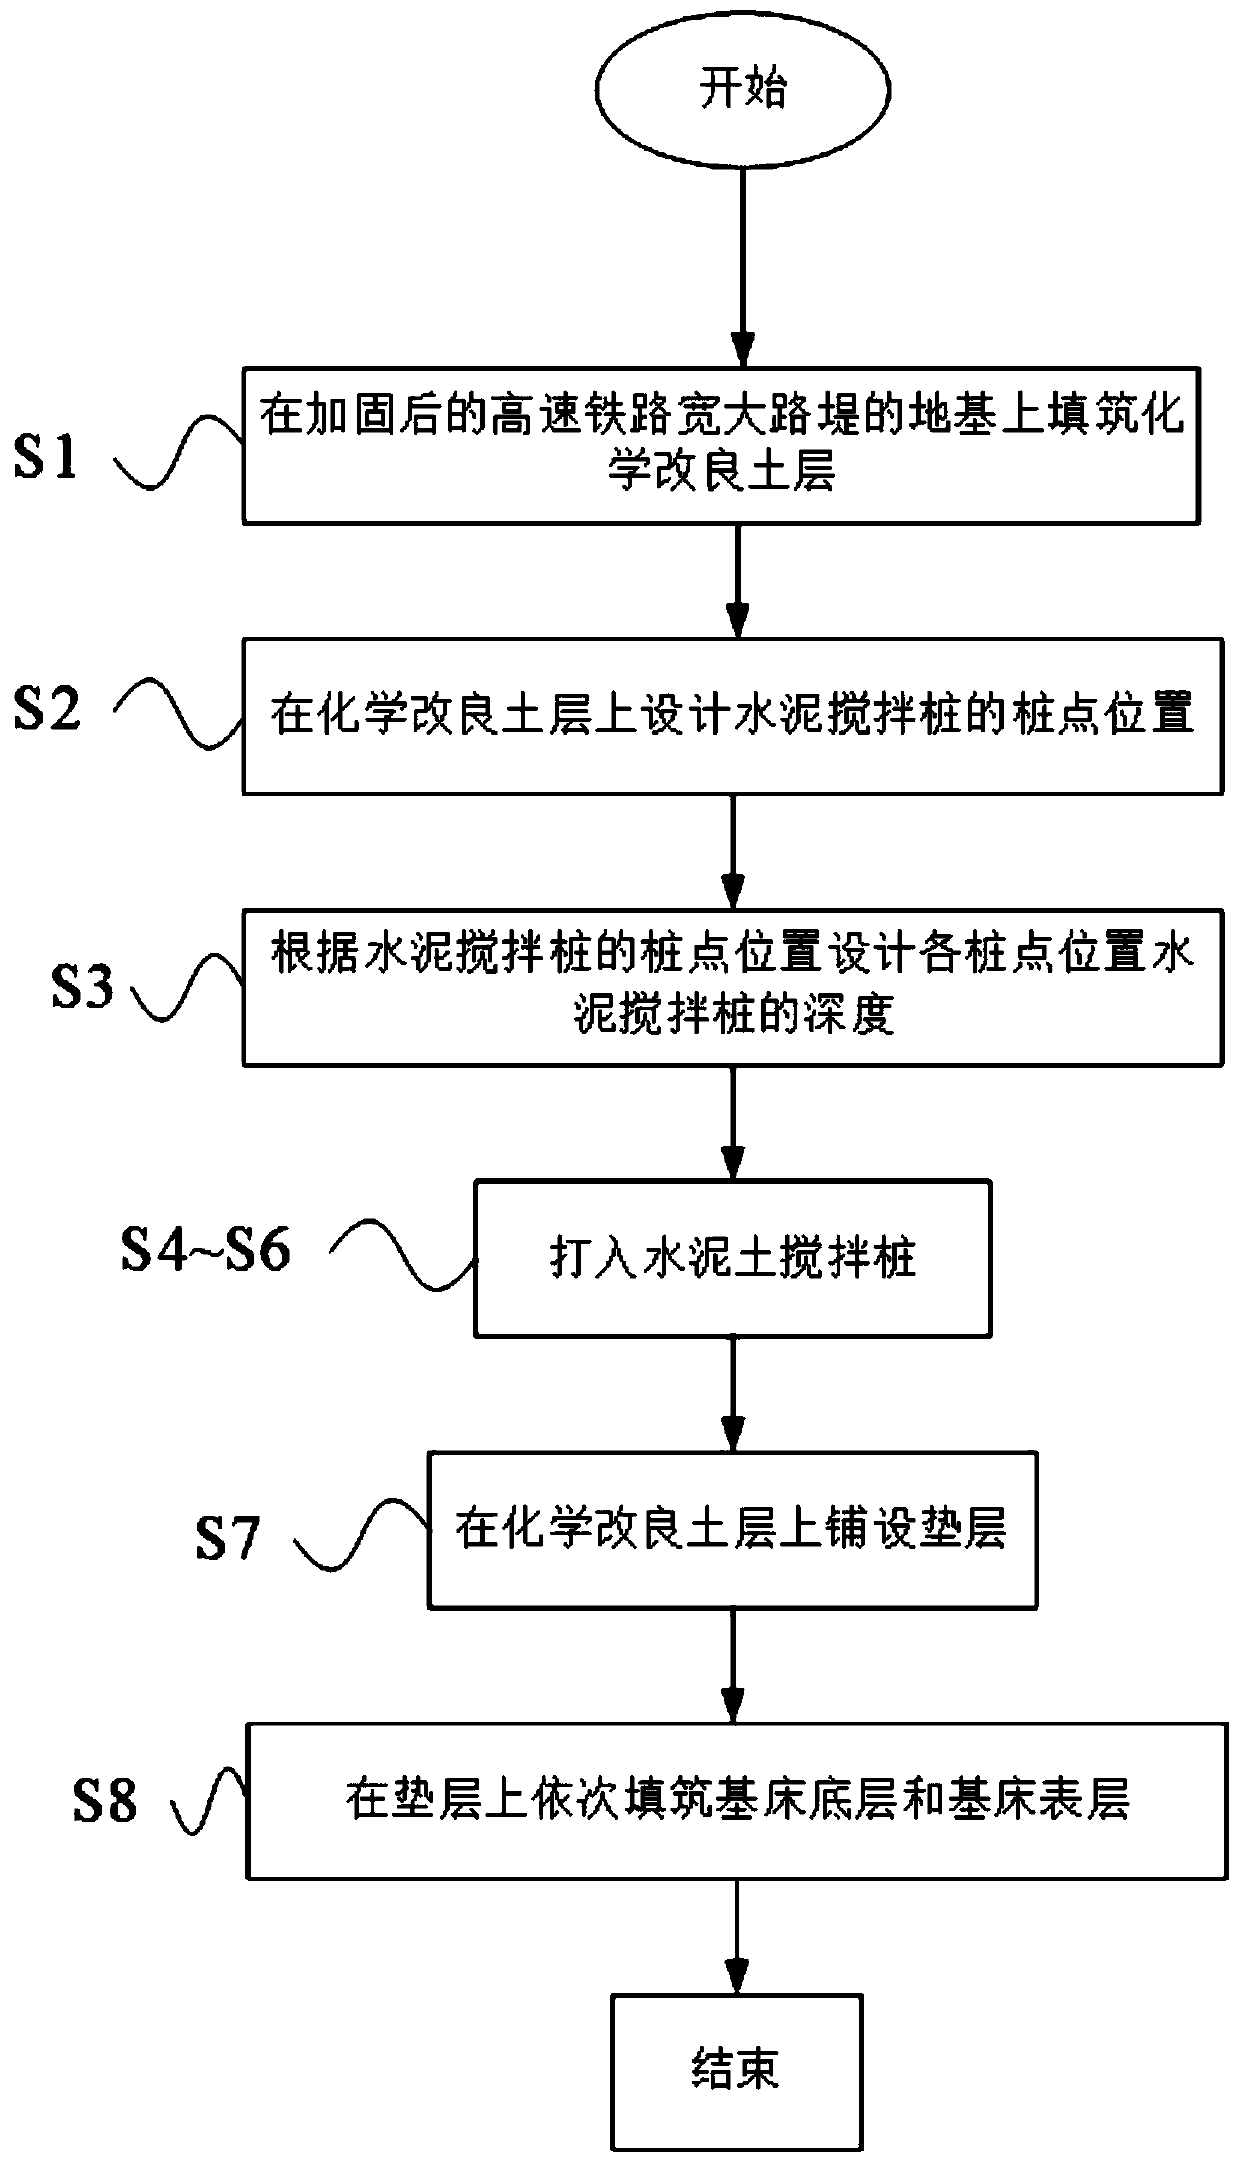 High-speed railway wide and large embankment settlement control method adopting cement mixing piles